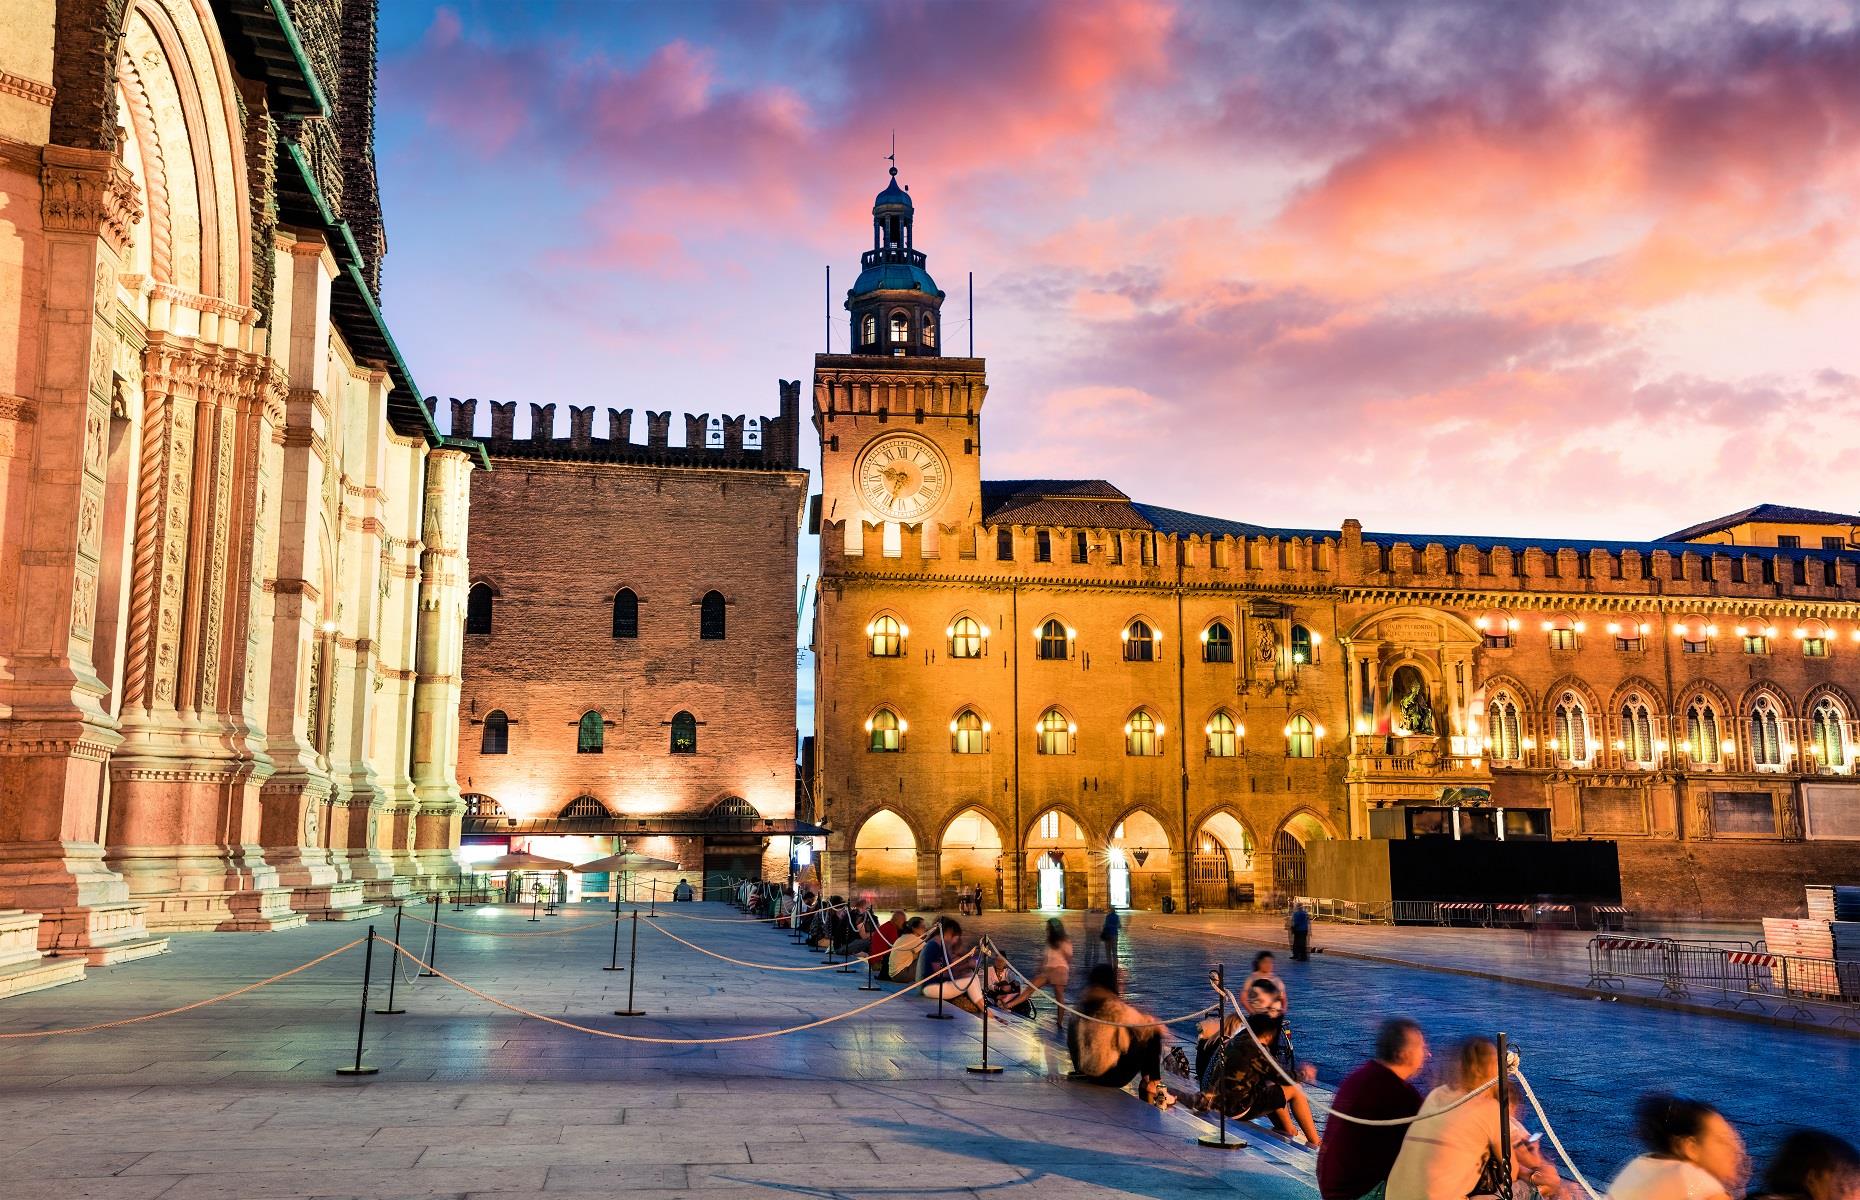 <p>Also known as Alma Mater Studiorum, <a href="https://www.unibo.it/en/university/who-we-are/virtual-tour-of-several-sites-of-the-university-of-bologna">The University of Bologna</a> is considered to be the oldest university in the Western world. Established in 1088, it has five campuses across Italy, in Bologna, Cesena, Forlì, Ravenna and Rimini, and has a community of more than 85,000 students. The institution is housed inside some spectacular buildings dating back to the Middle Ages and the Renaissance era, and highlights include the Bologna University Library, with its arched ceiling, dark wood and ornate columns.</p>